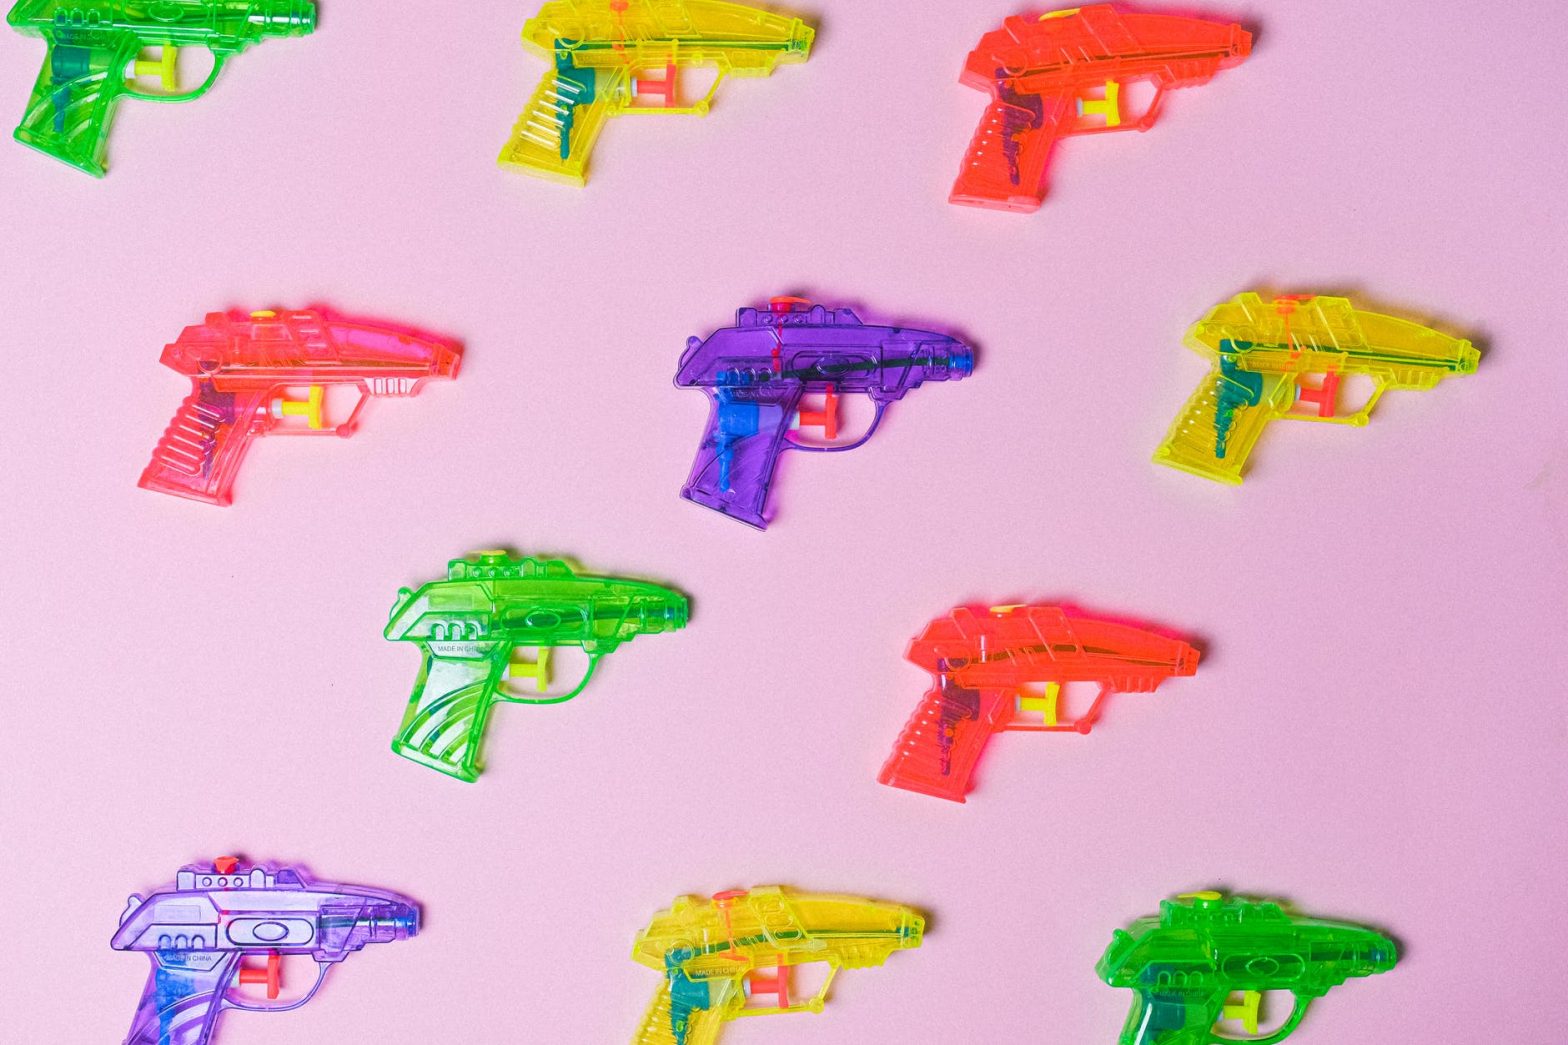 assortment of colorful guns for game